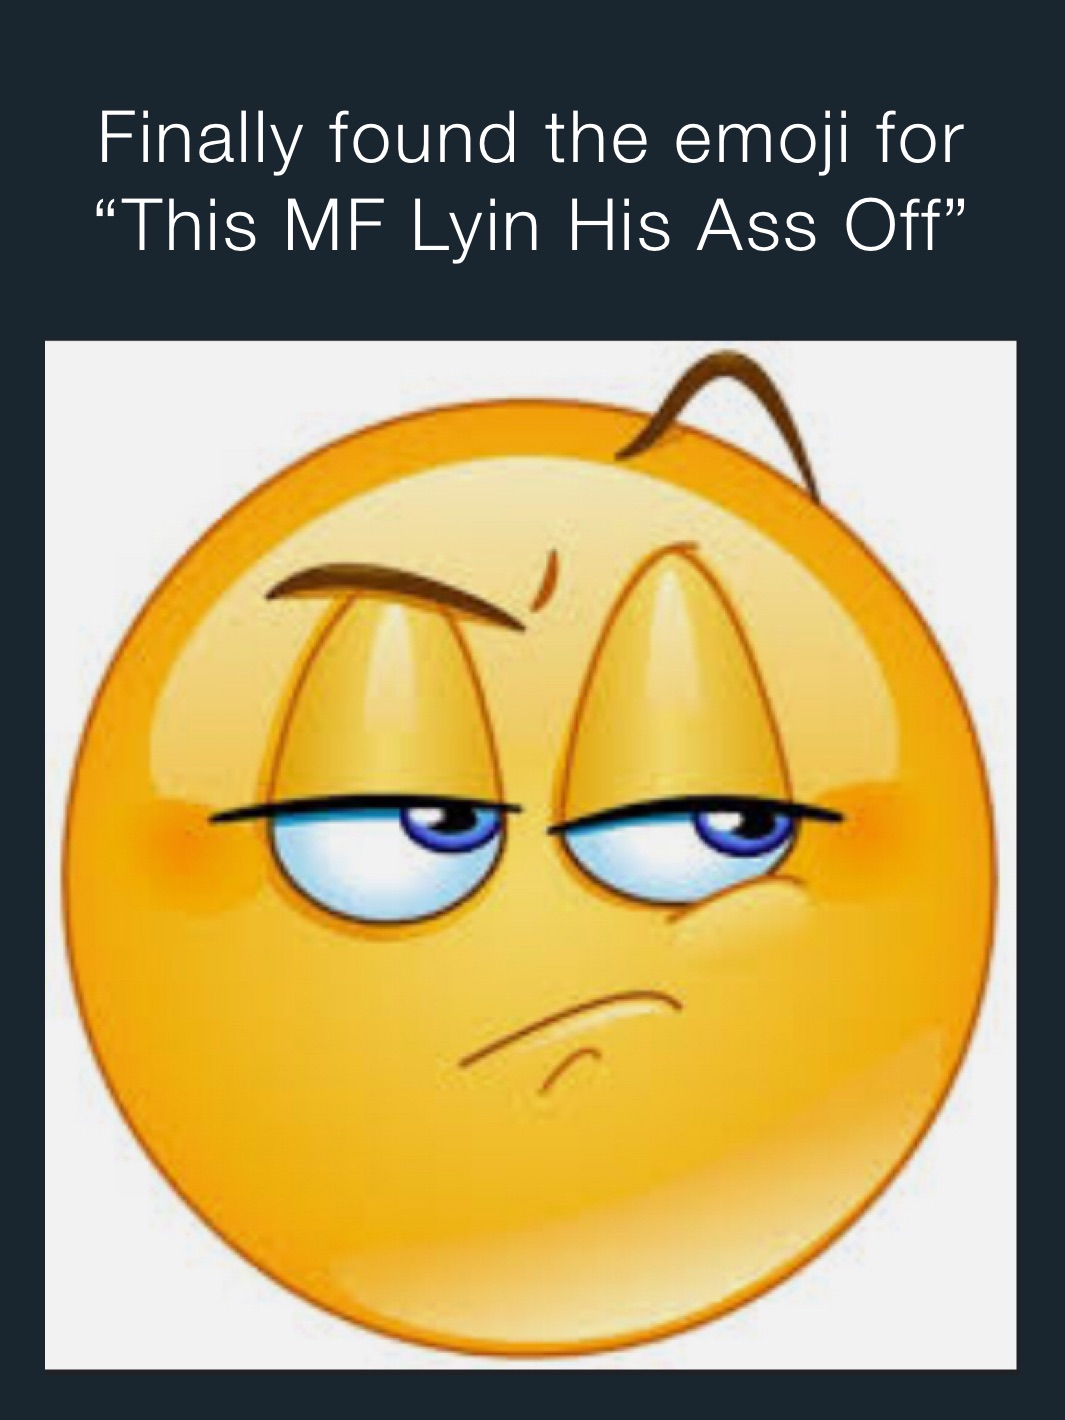 Finally found the emoji for “This MF Lyin His Ass Off”